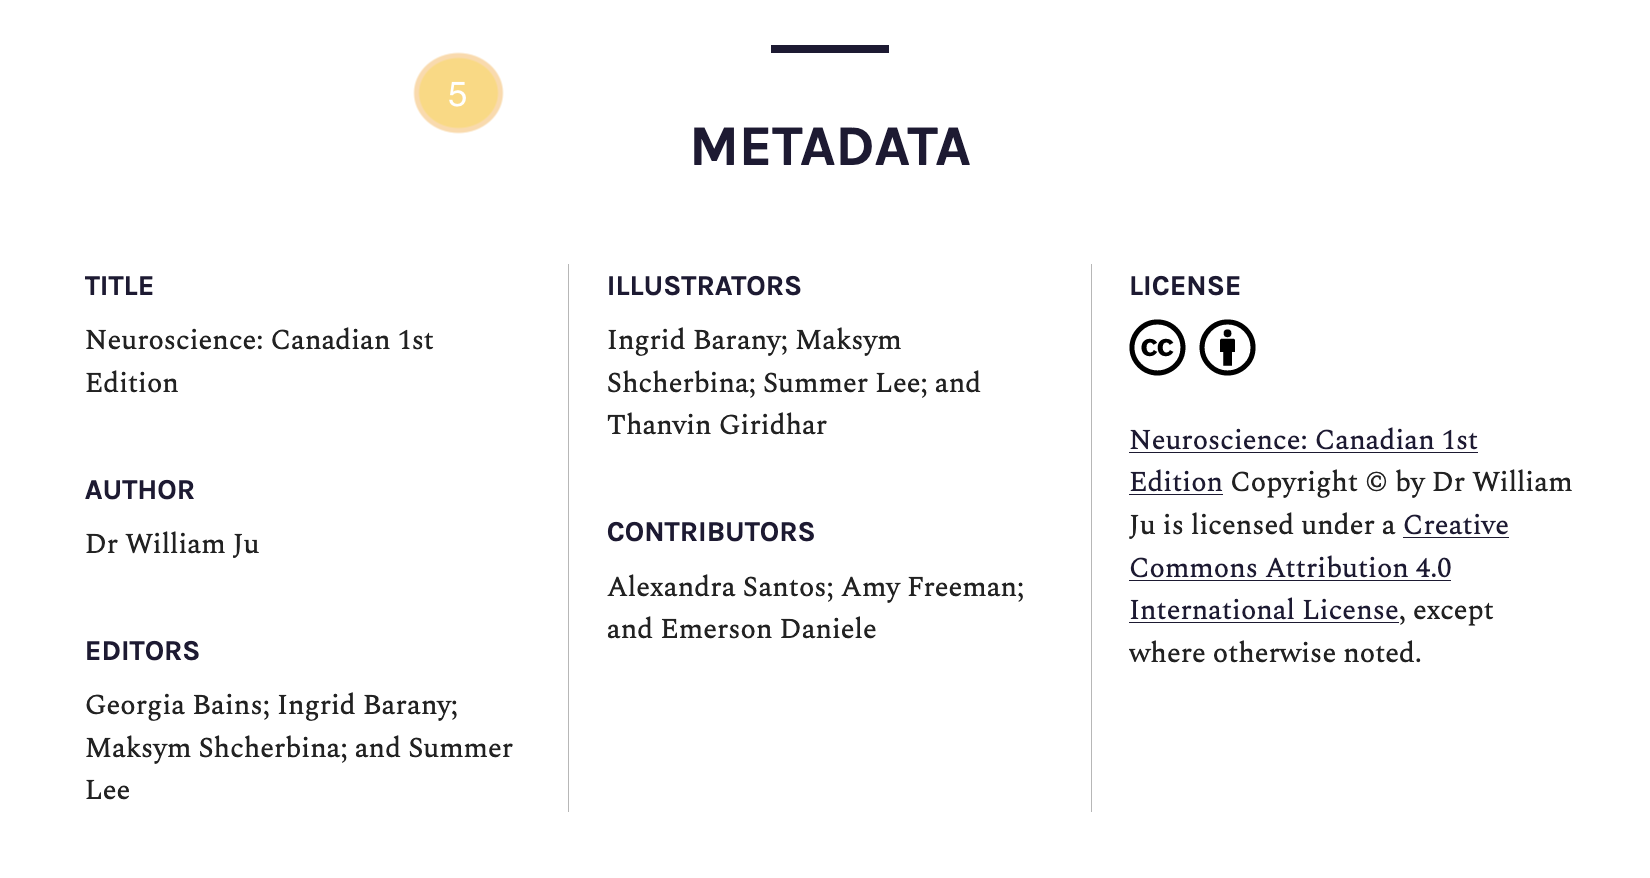 Pressbooks Metadata page containing the book title, author, collaborators and license information.